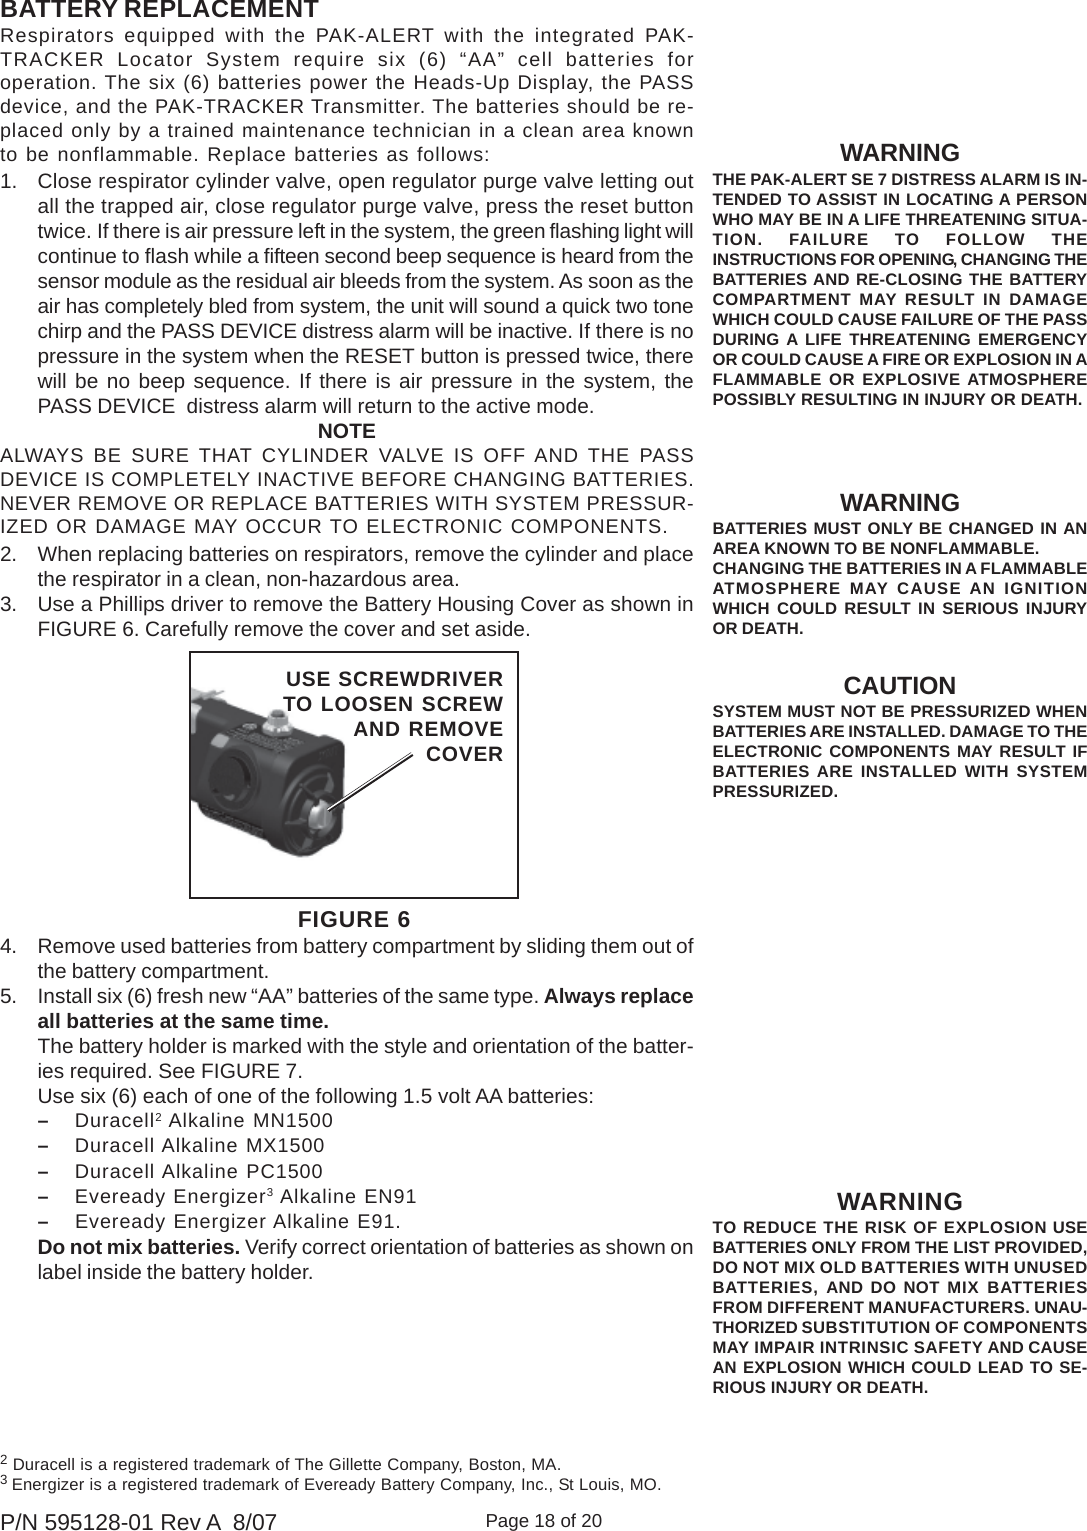 Page 18 of 20P/N 595128-01 Rev A  8/07CAUTIONSYSTEM MUST NOT BE PRESSURIZED WHENBATTERIES ARE INSTALLED. DAMAGE TO THEELECTRONIC COMPONENTS MAY RESULT IFBATTERIES ARE INSTALLED WITH SYSTEMPRESSURIZED.Respirators equipped with the PAK-ALERT with the integrated PAK-TRACKER Locator System require six (6) “AA” cell batteries foroperation. The six (6) batteries power the Heads-Up Display, the PASSdevice, and the PAK-TRACKER Transmitter. The batteries should be re-placed only by a trained maintenance technician in a clean area knownto be nonflammable. Replace batteries as follows:1. Close respirator cylinder valve, open regulator purge valve letting outall the trapped air, close regulator purge valve, press the reset buttontwice. If there is air pressure left in the system, the green flashing light willcontinue to flash while a fifteen second beep sequence is heard from thesensor module as the residual air bleeds from the system. As soon as theair has completely bled from system, the unit will sound a quick two tonechirp and the PASS DEVICE distress alarm will be inactive. If there is nopressure in the system when the RESET button is pressed twice, therewill be no beep sequence. If there is air pressure in the system, thePASS DEVICE  distress alarm will return to the active mode.NOTEALWAYS BE SURE THAT CYLINDER VALVE IS OFF AND THE PASSDEVICE IS COMPLETELY INACTIVE BEFORE CHANGING BATTERIES.NEVER REMOVE OR REPLACE BATTERIES WITH SYSTEM PRESSUR-IZED OR DAMAGE MAY OCCUR TO ELECTRONIC COMPONENTS.2. When replacing batteries on respirators, remove the cylinder and placethe respirator in a clean, non-hazardous area.3. Use a Phillips driver to remove the Battery Housing Cover as shown inFIGURE 6. Carefully remove the cover and set aside.4. Remove used batteries from battery compartment by sliding them out ofthe battery compartment.5. Install six (6) fresh new “AA” batteries of the same type. Always replaceall batteries at the same time.The battery holder is marked with the style and orientation of the batter-ies required. See FIGURE 7.Use six (6) each of one of the following 1.5 volt AA batteries:–Duracell2 Alkaline MN1500–Duracell Alkaline MX1500–Duracell Alkaline PC1500–Eveready Energizer3 Alkaline EN91–Eveready Energizer Alkaline E91.Do not mix batteries. Verify correct orientation of batteries as shown onlabel inside the battery holder.WARNINGTHE PAK-ALERT SE 7 DISTRESS ALARM IS IN-TENDED TO ASSIST IN LOCATING A PERSONWHO MAY BE IN A LIFE THREATENING SITUA-TION. FAILURE TO FOLLOW THEINSTRUCTIONS FOR OPENING, CHANGING THEBATTERIES AND RE-CLOSING THE BATTERYCOMPARTMENT MAY RESULT IN DAMAGEWHICH COULD CAUSE FAILURE OF THE PASSDURING A LIFE THREATENING EMERGENCYOR COULD CAUSE A FIRE OR EXPLOSION IN AFLAMMABLE OR EXPLOSIVE ATMOSPHEREPOSSIBLY RESULTING IN INJURY OR DEATH.WARNINGBATTERIES MUST ONLY BE CHANGED IN ANAREA KNOWN TO BE NONFLAMMABLE.CHANGING THE BATTERIES IN A FLAMMABLEATMOSPHERE MAY CAUSE AN IGNITIONWHICH COULD RESULT IN SERIOUS INJURYOR DEATH.BATTERY REPLACEMENT2 Duracell is a registered trademark of The Gillette Company, Boston, MA.3 Energizer is a registered trademark of Eveready Battery Company, Inc., St Louis, MO.WARNINGTO REDUCE THE RISK OF EXPLOSION USEBATTERIES ONLY FROM THE LIST PROVIDED,DO NOT MIX OLD BATTERIES WITH UNUSEDBATTERIES, AND DO NOT MIX BATTERIESFROM DIFFERENT MANUFACTURERS. UNAU-THORIZED SUBSTITUTION OF COMPONENTSMAY IMPAIR INTRINSIC SAFETY AND CAUSEAN EXPLOSION WHICH COULD LEAD TO SE-RIOUS INJURY OR DEATH.FIGURE 6USE SCREWDRIVERTO LOOSEN SCREW AND REMOVECOVER